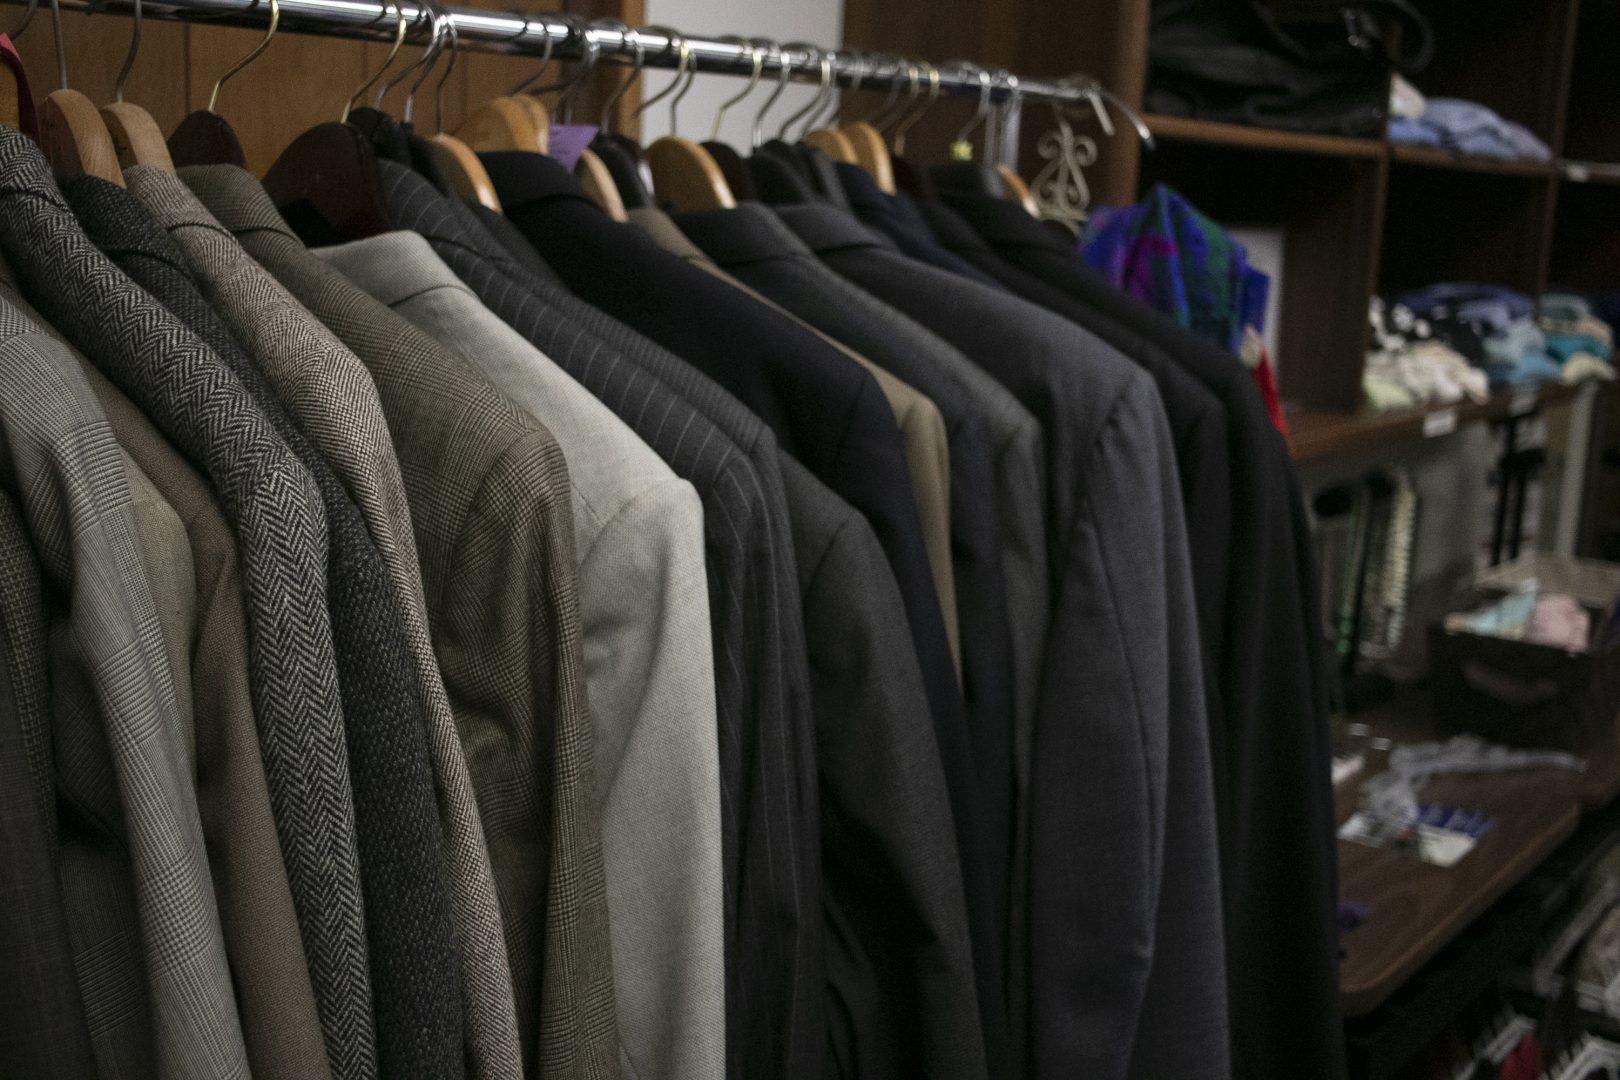 A rack of coats displayed at the Clothing Closet. The Clothing Closet, located in the Frank W. Thomas Building, provides students with free professional attire. (Larry Valenzuela/ The Collegian)